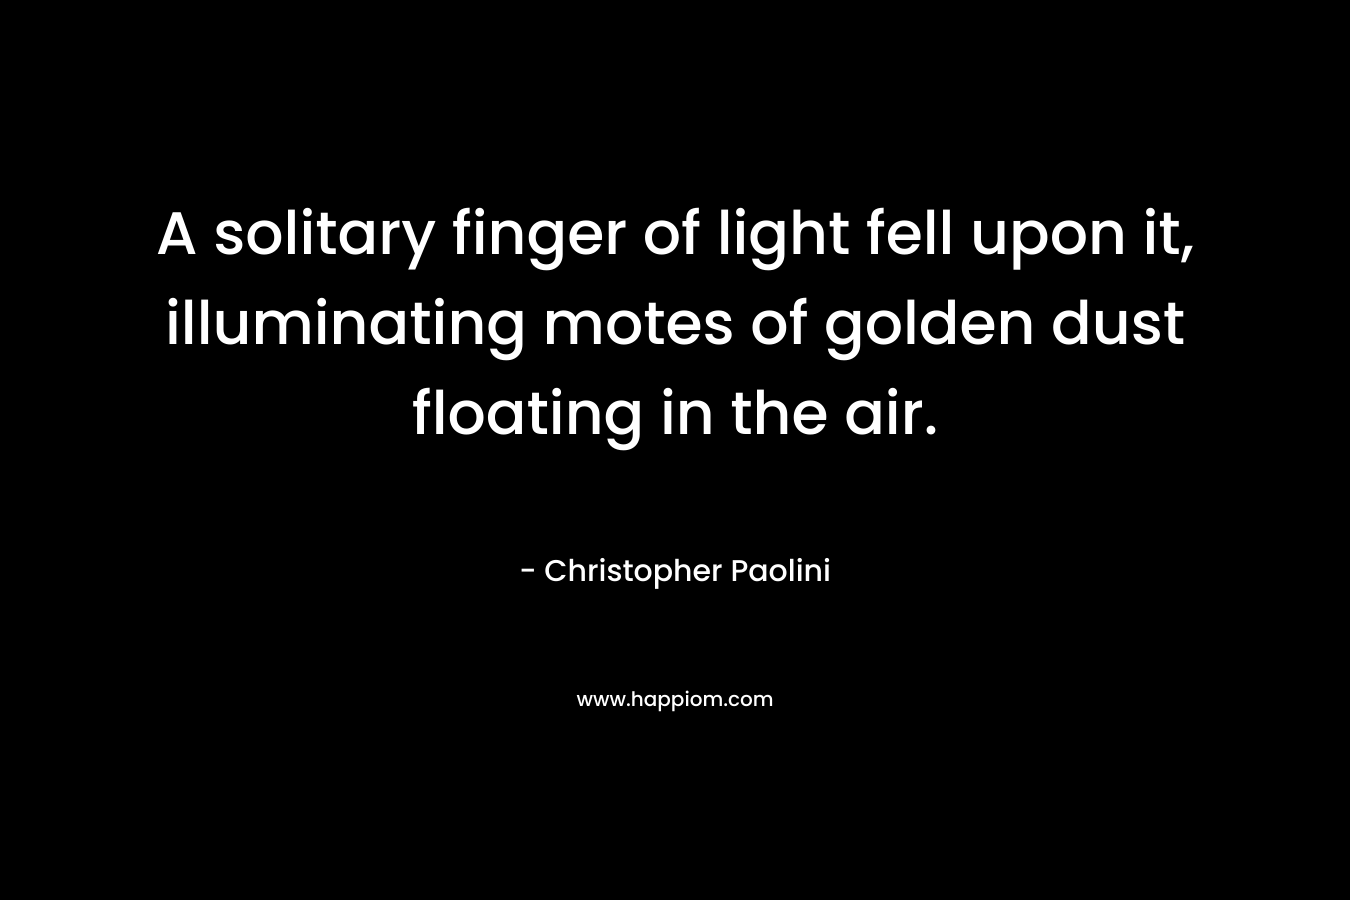 A solitary finger of light fell upon it, illuminating motes of golden dust floating in the air. – Christopher Paolini